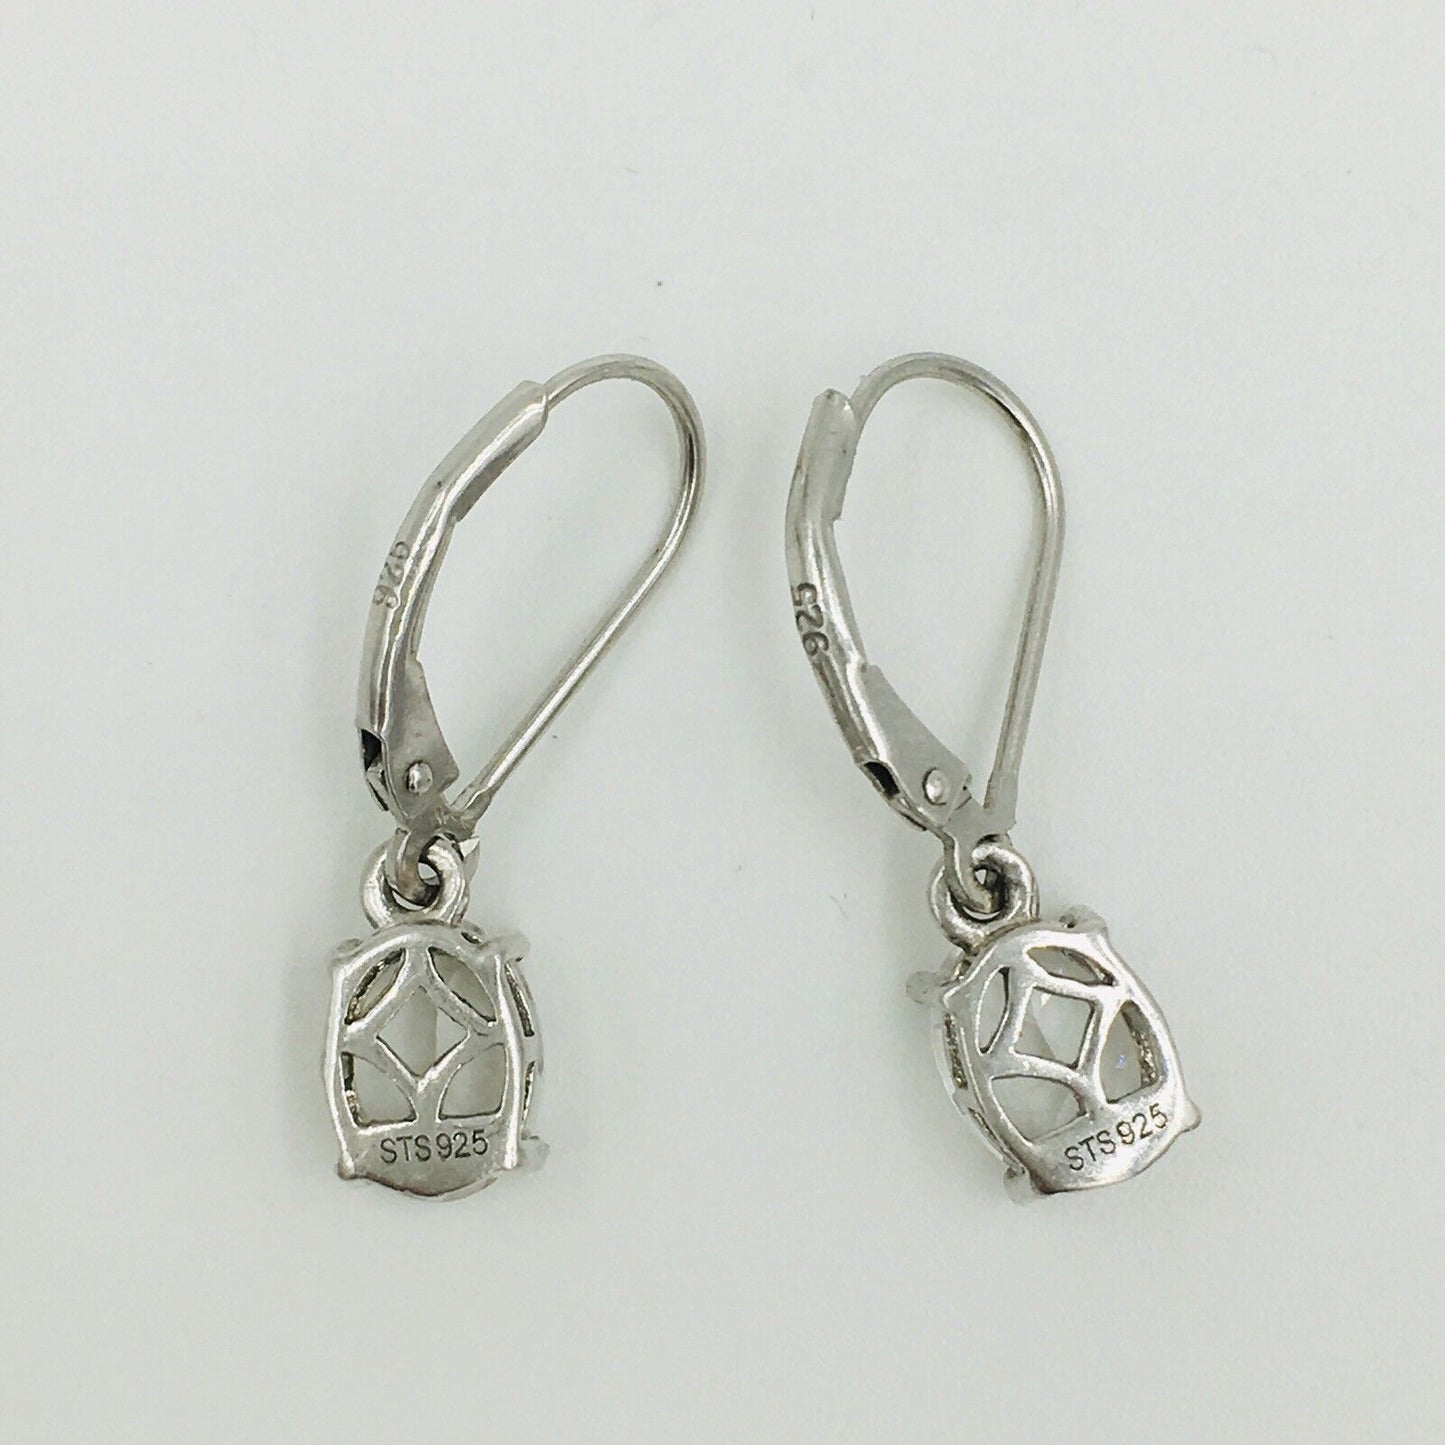 Sts Chuck Clemency Aquamarine Sterling Silver Earrings